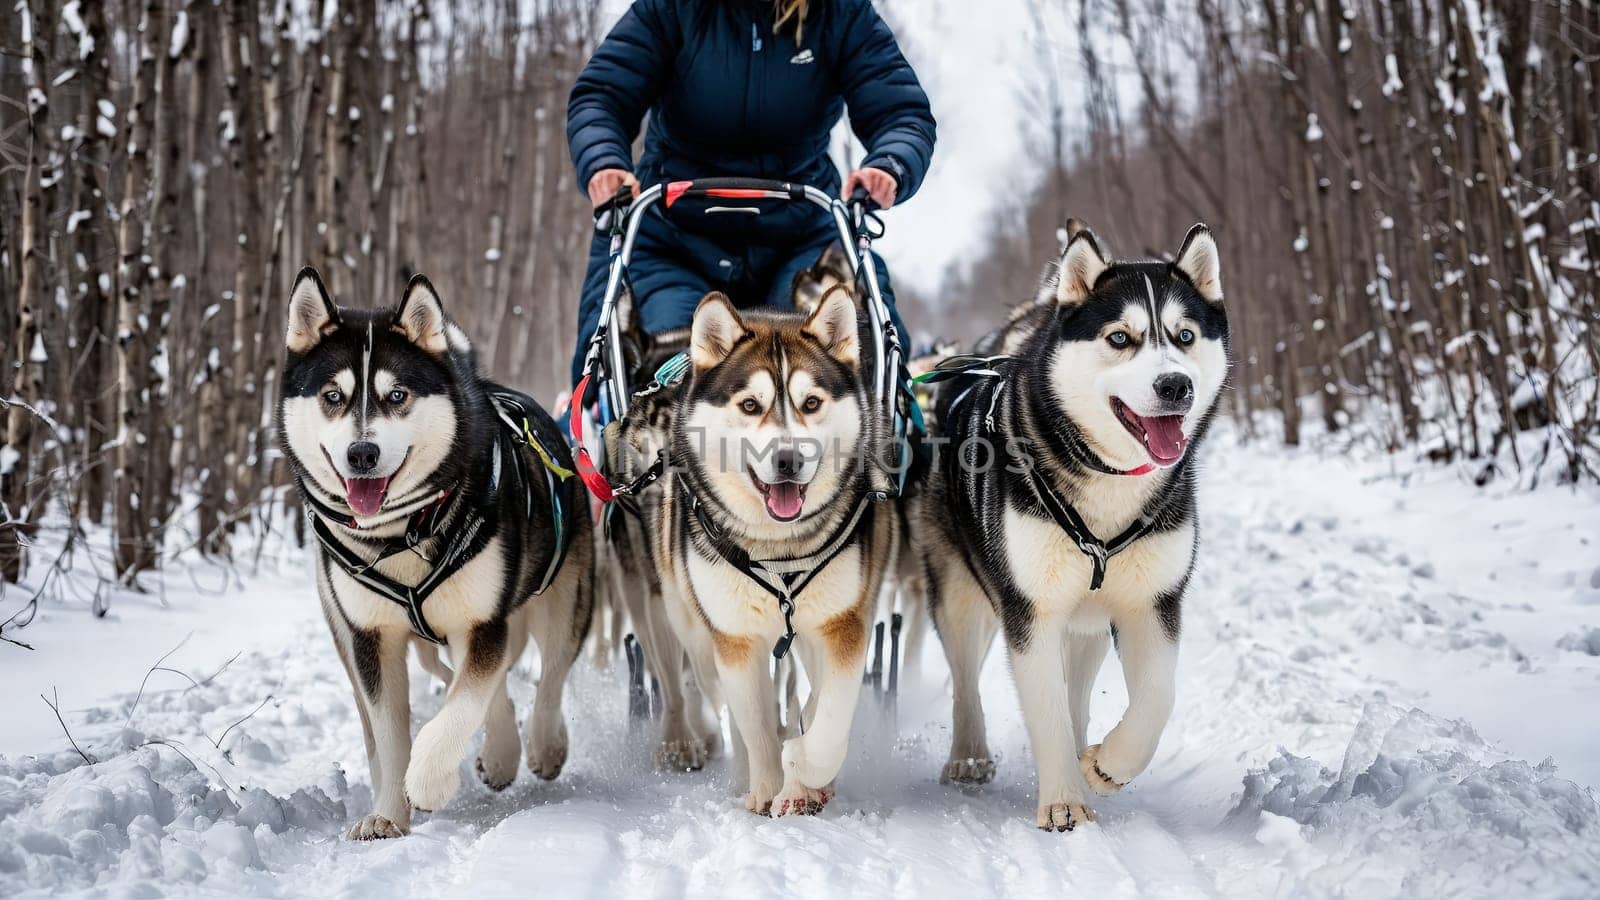 Woman dog sledding team of huskies pulling snowy trail exhilarated expression motion blur by panophotograph